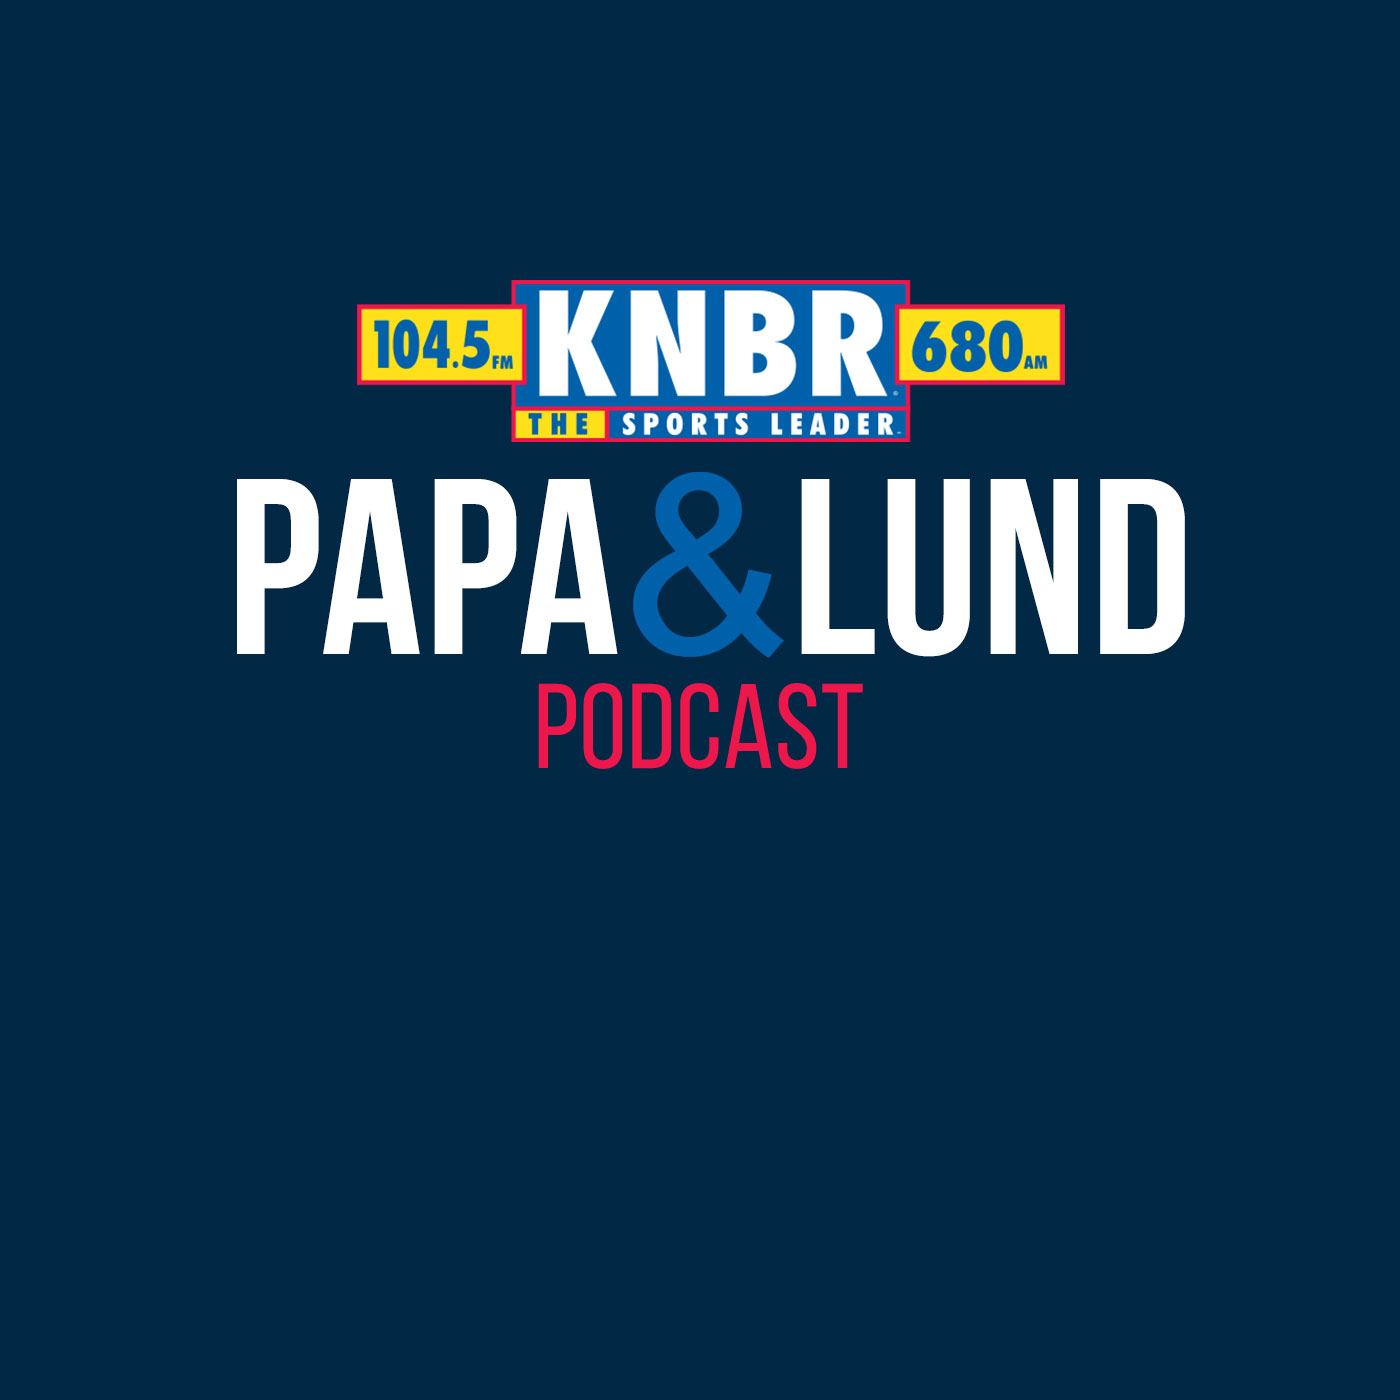 6-10 Jack Harris join Papa & Lund to preview the upcoming series between the Giants and Dodgers and provides insight into how Dave Roberts may line up his rotation with Clayton Kershaw due back from injury